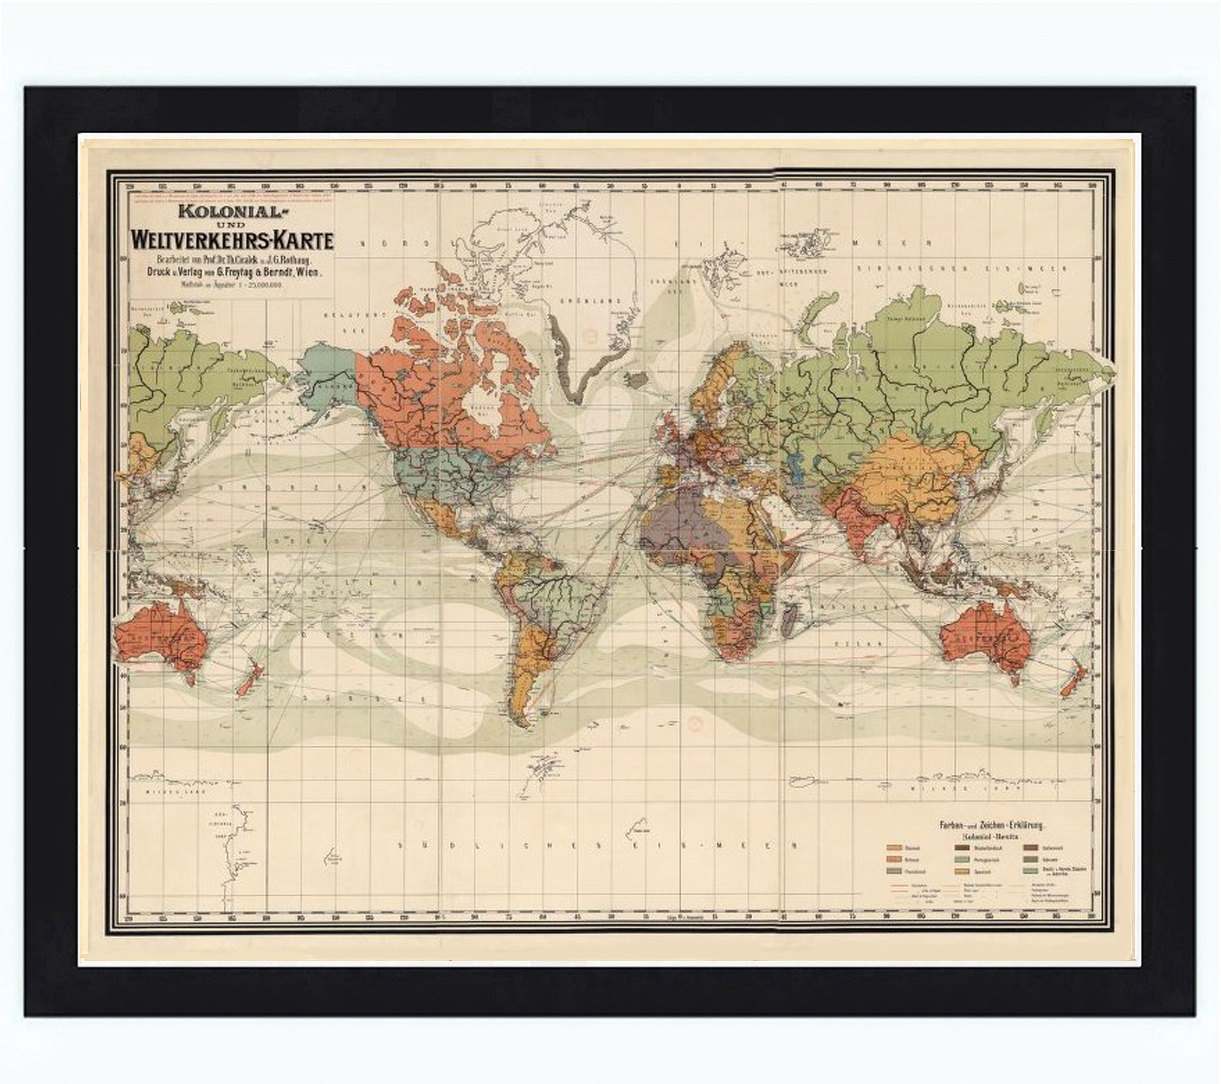 Old World Map Atlas Vintage World Map 1864 Colonial Chart Mercator Projection